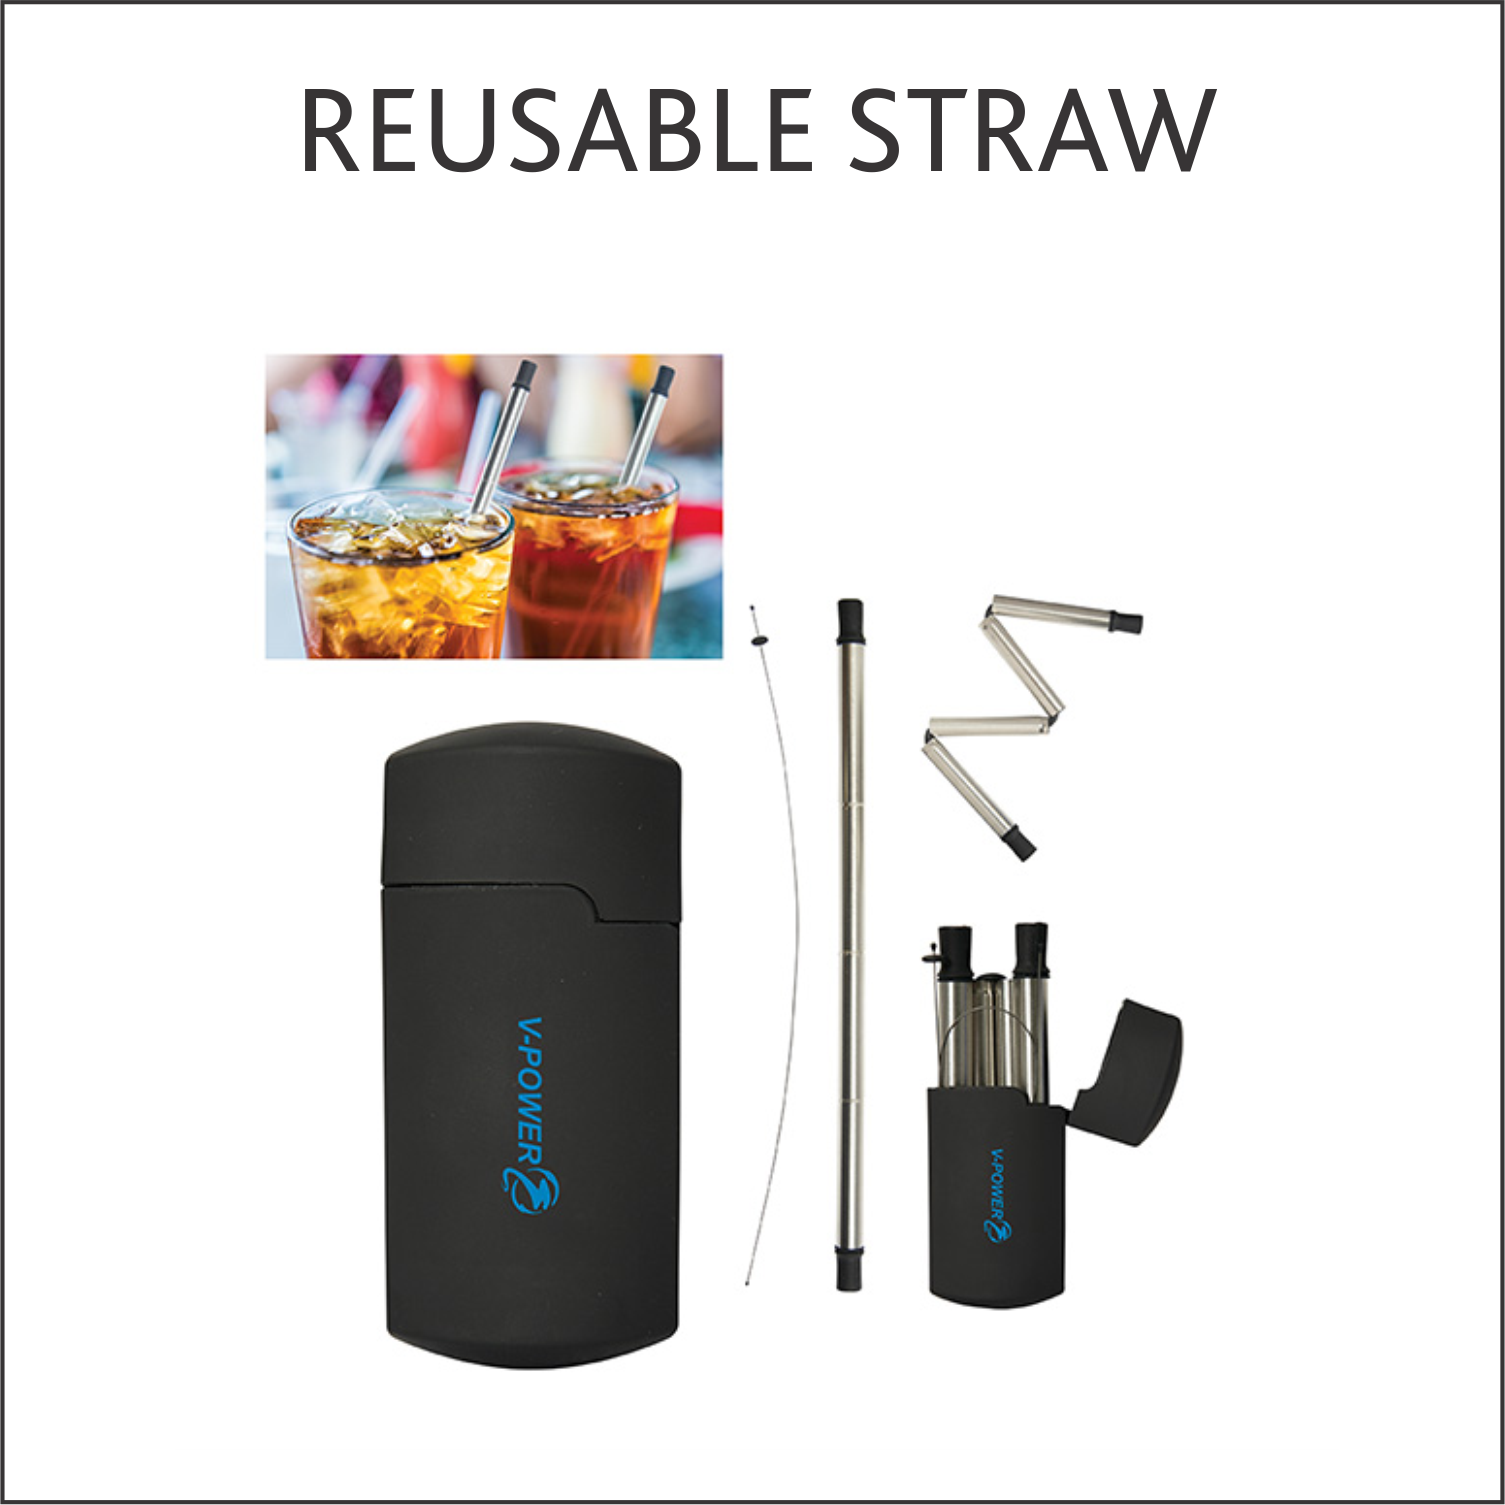 REUSABLE STRAW.png